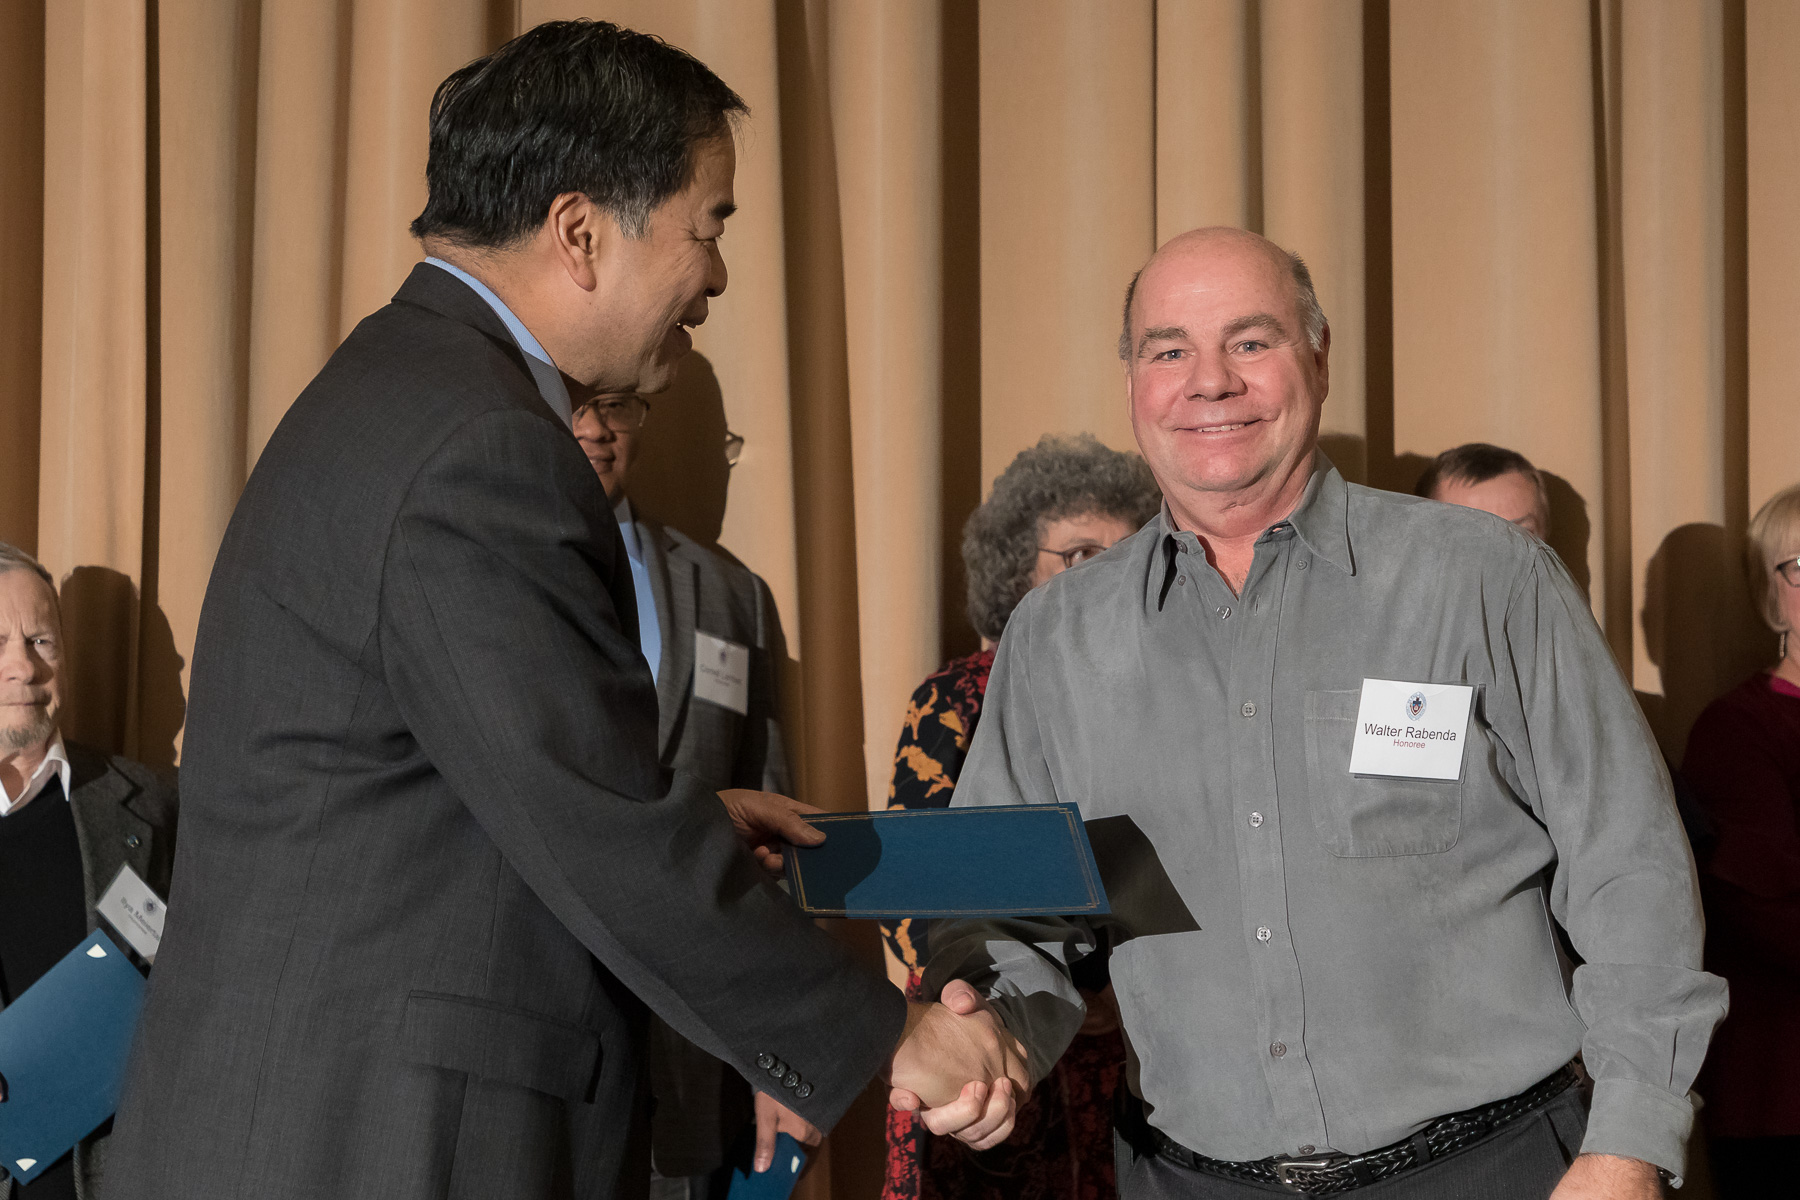 Walter Rabenda, right, with A. Gabriel Esteban, Ph.D., president, as faculty and staff members are inducted into DePaul University's 25 Year Club, Tuesday, Nov. 13, 2018, at the Lincoln Park Student Center. Employees celebrating their 25th work anniversary were honored at the luncheon with their colleagues and will have their names added to plaques located on the Loop and Lincoln Park Campuses. (DePaul University/Jeff Carrion)